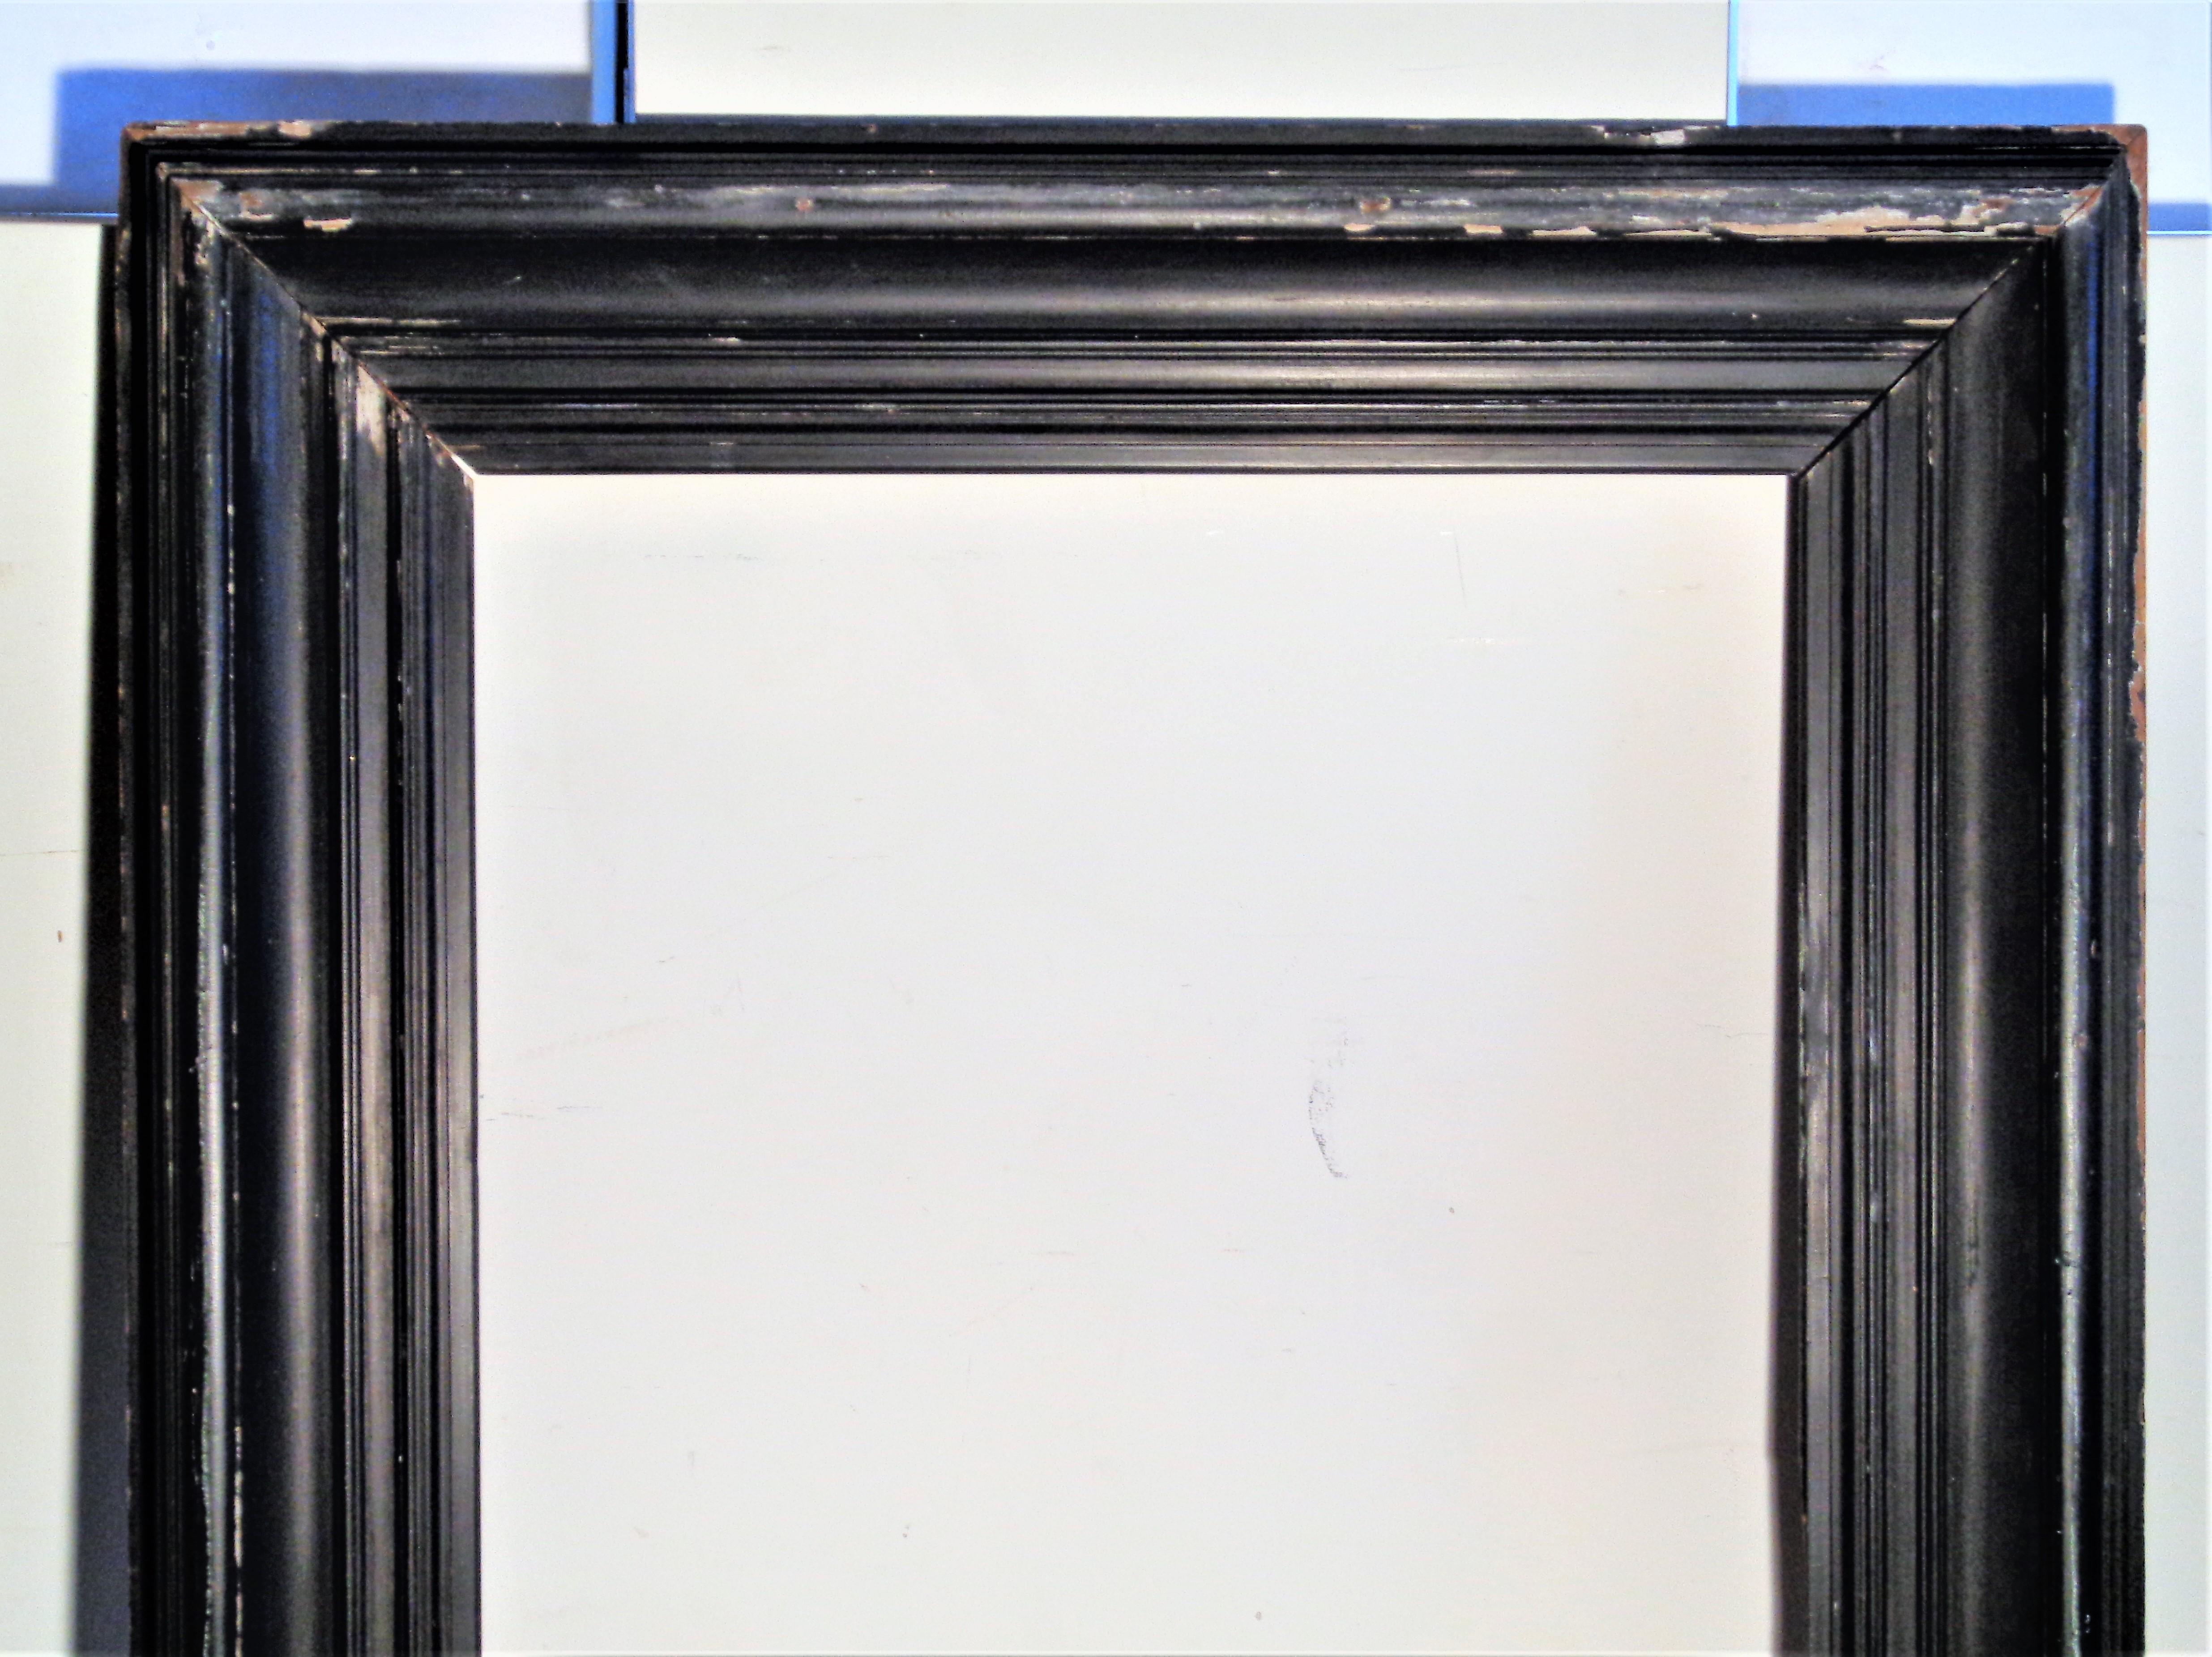 Massive 19th century wood frame with wide deep molding in older black painted surface with some areas of wear showing underlying gesso and bare wood. Great quality early construction. For a painting or a mirror. Lots of potential, would be great